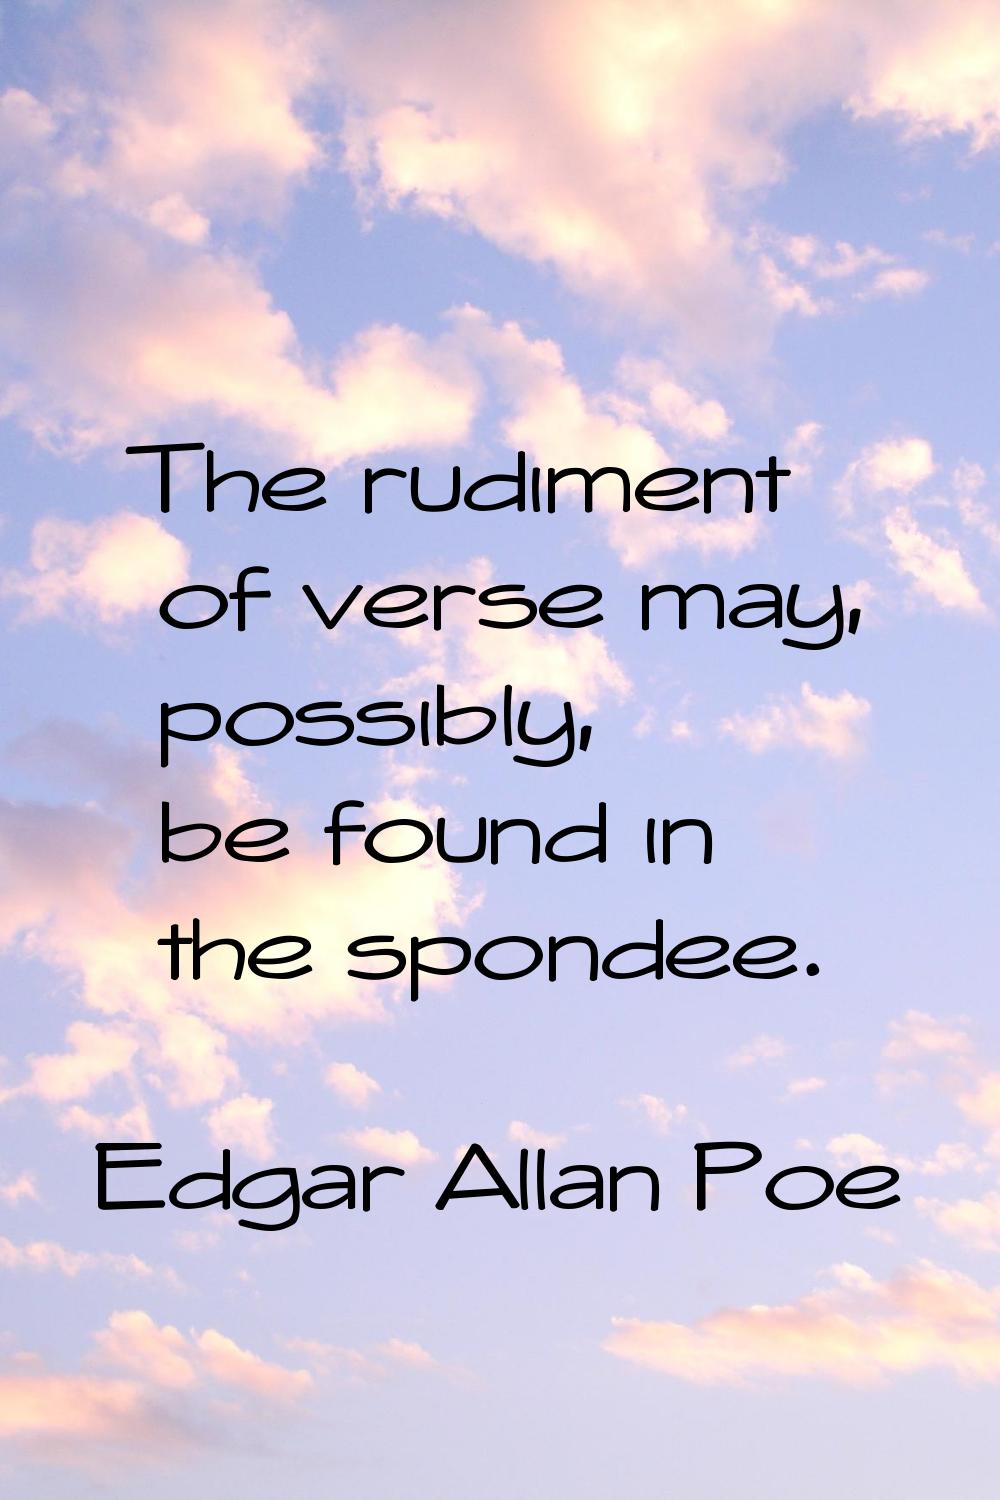 The rudiment of verse may, possibly, be found in the spondee.